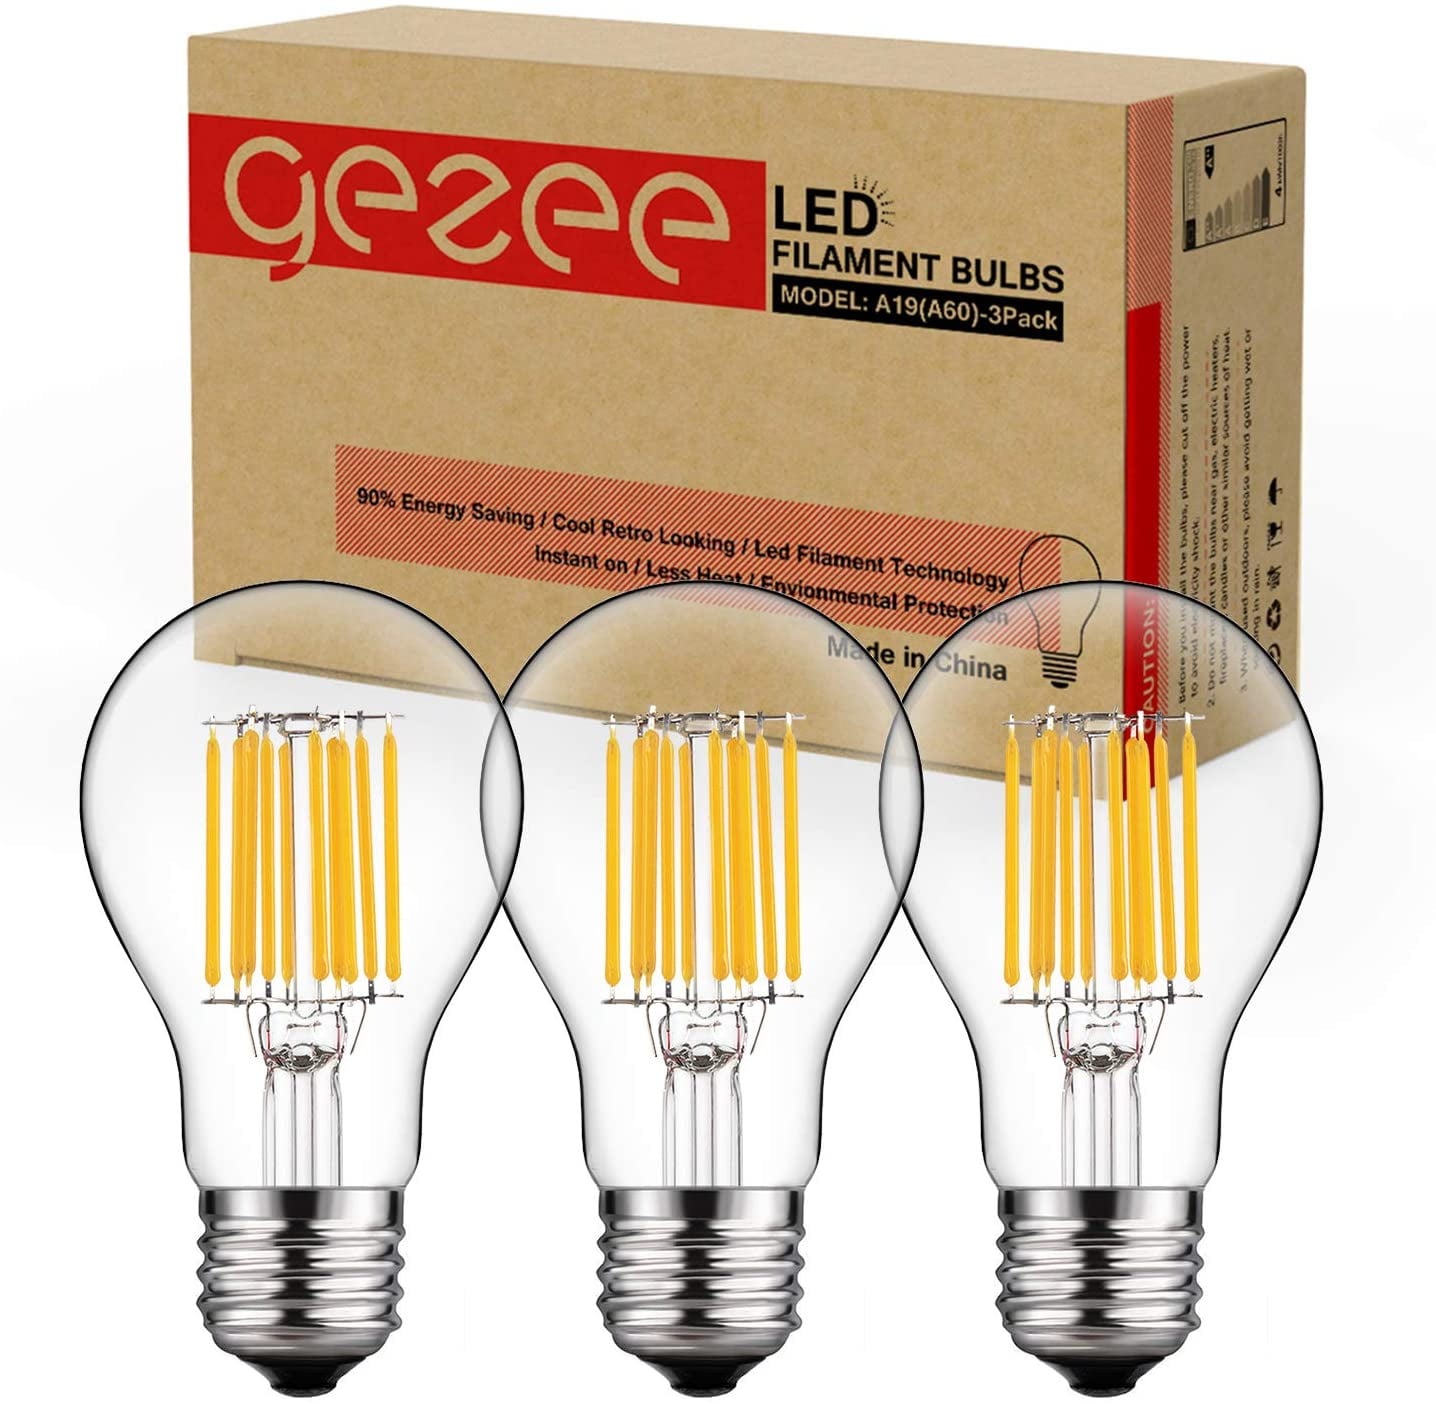 G45/G14 Amber Glass Globe Cover Pack of 6 Dimmable E12 Candelabra Base Antique Gold Tint Panledo 4W Vintage Edison LED Filament Light Bulb 2200K Ultra Warm White 40W Incandescent Replacement